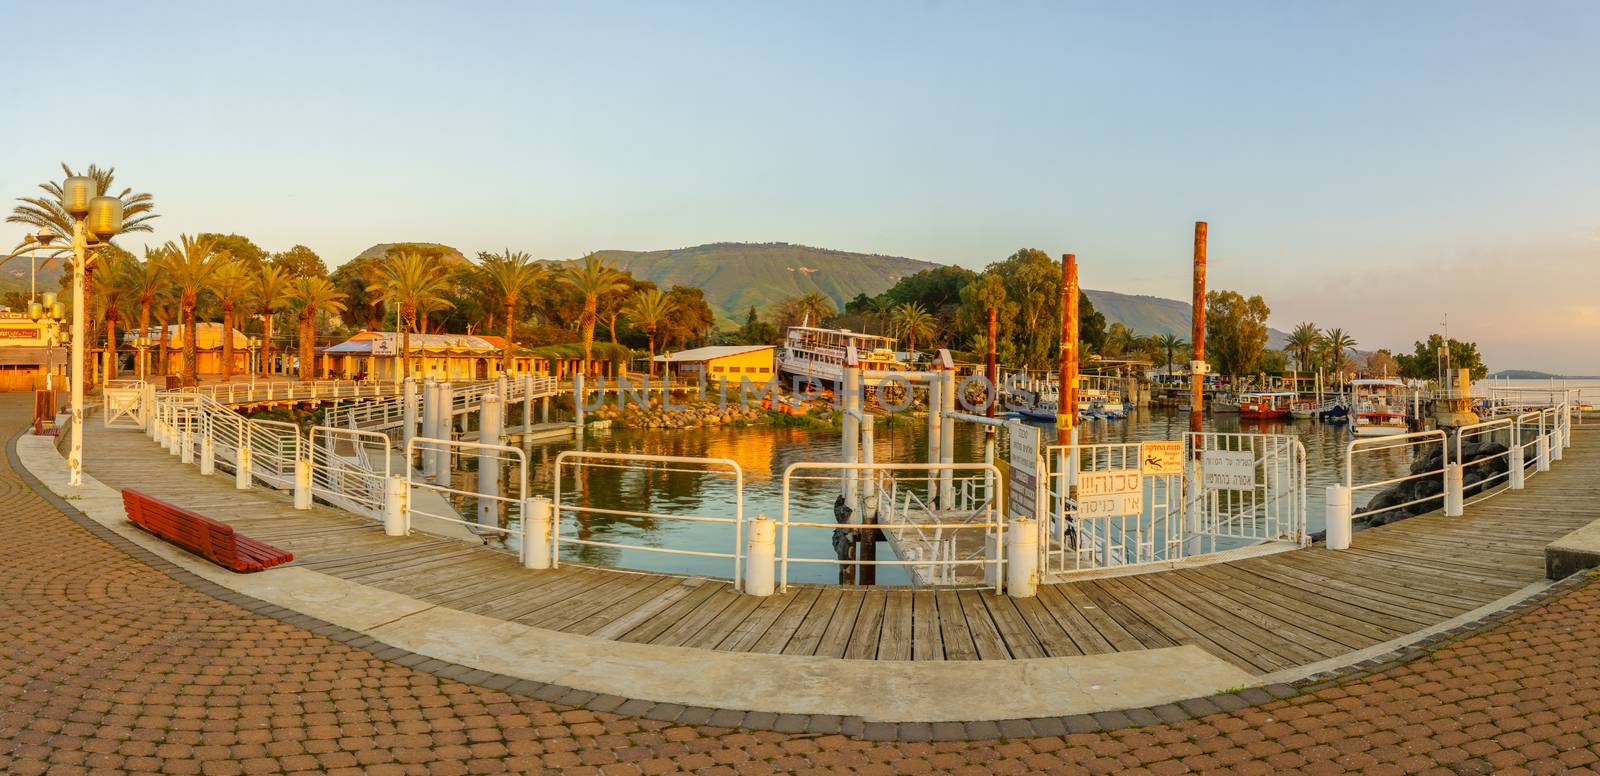 Panoramic sunset view of the fishing port of Kibbutz Ein Gev by RnDmS